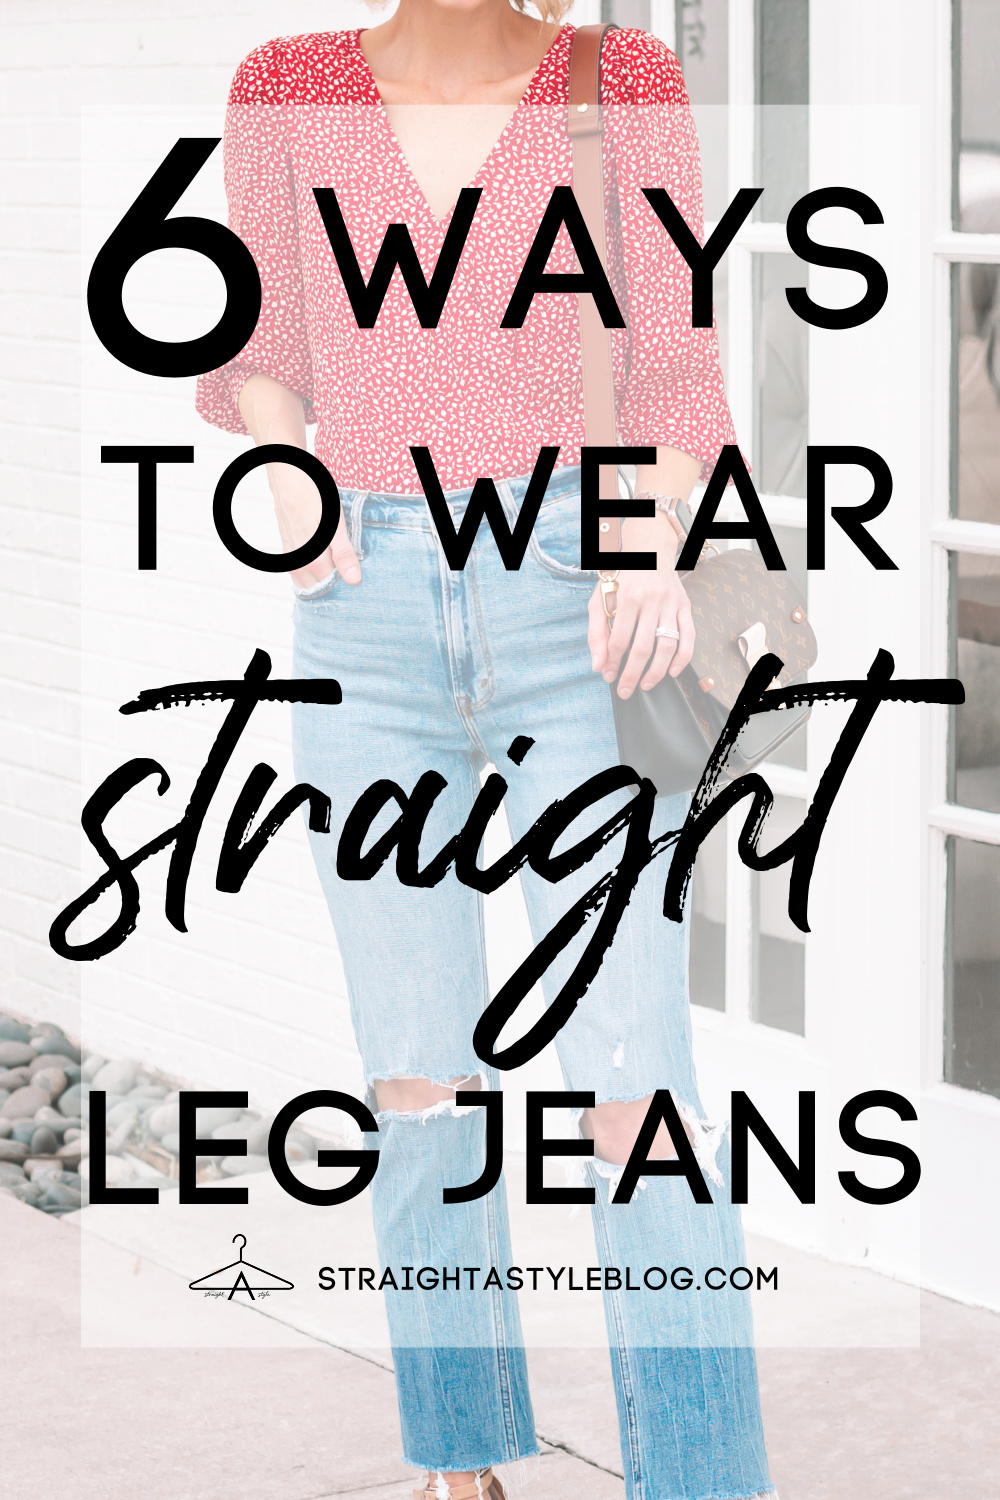 How to Wear Straight Leg Jeans - 6 Straight Leg Jean Outfit Ideas